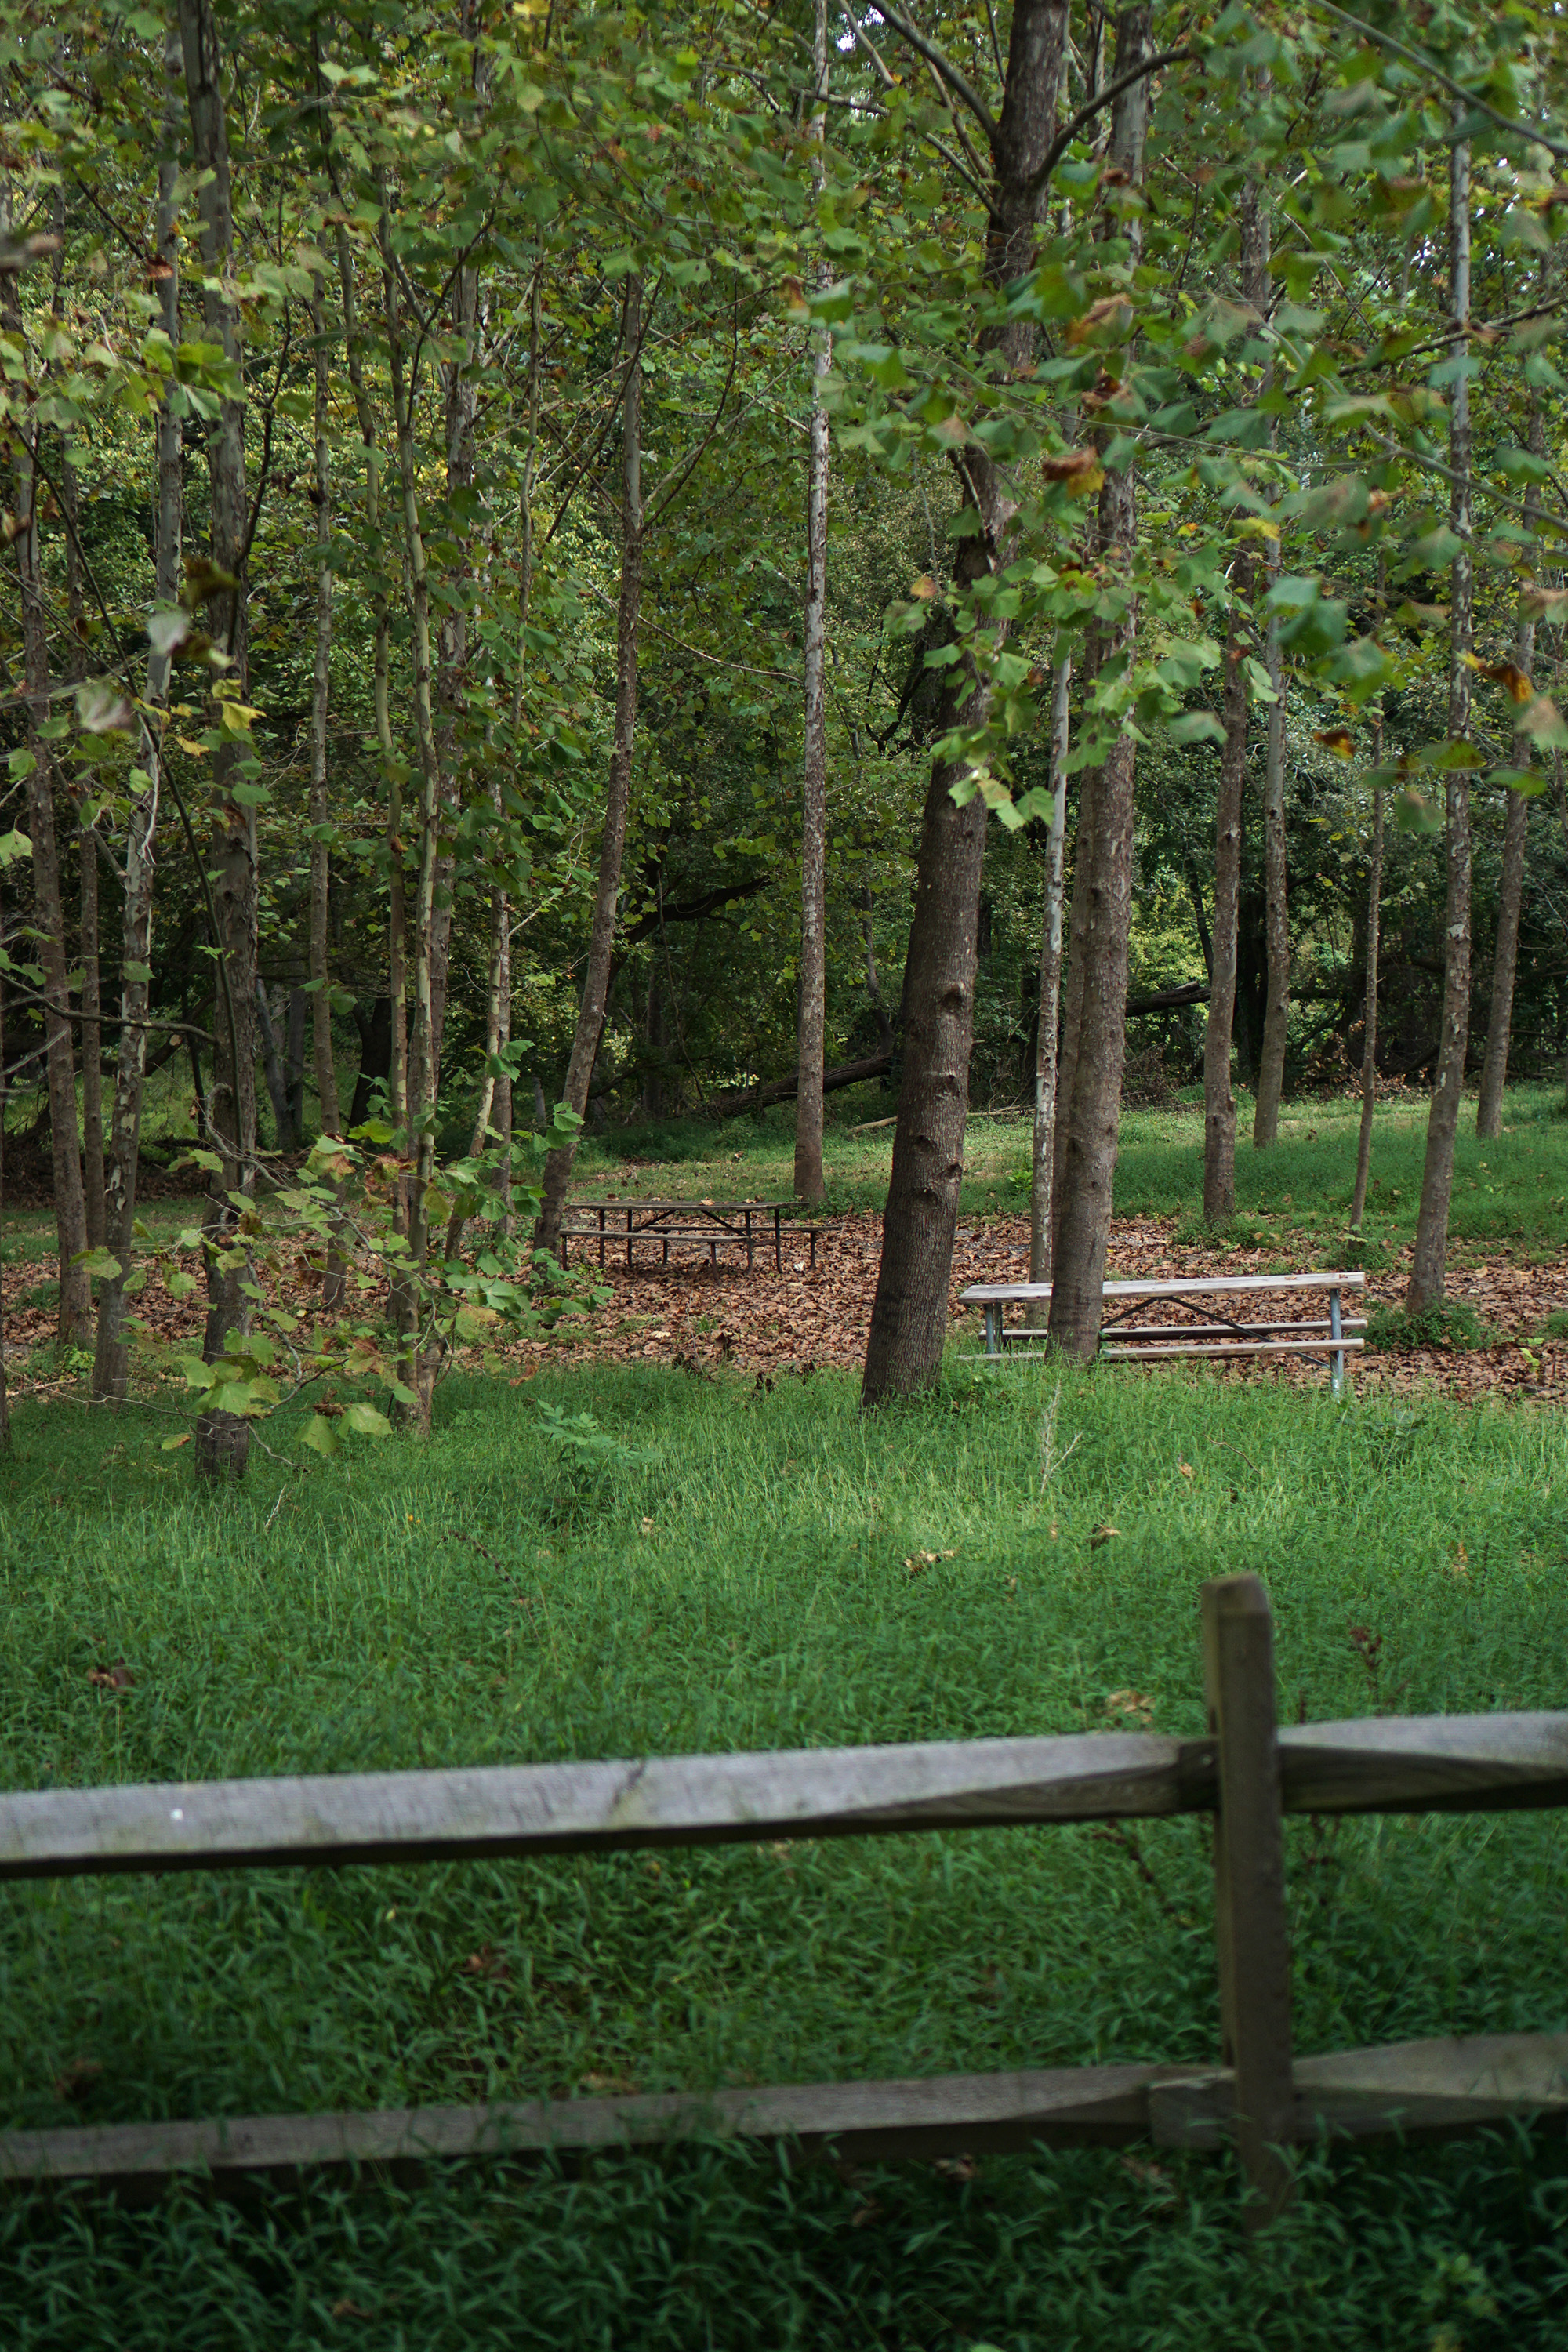 Picnic area among the trees, Patapsco Valley State Park, Maryland / Darker than Green